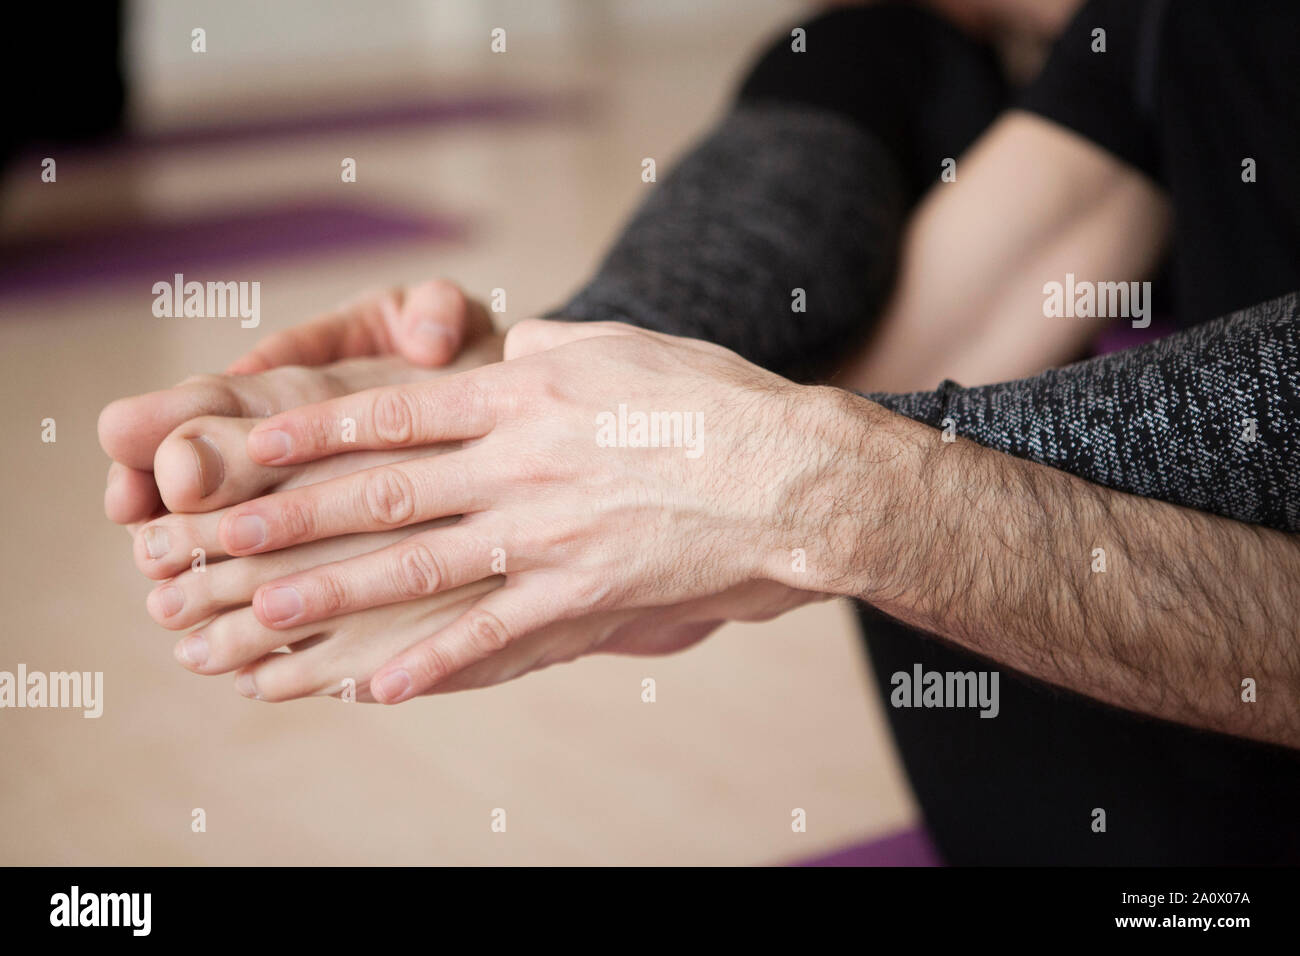 Yoga position, close up of legs and hands Stock Photo